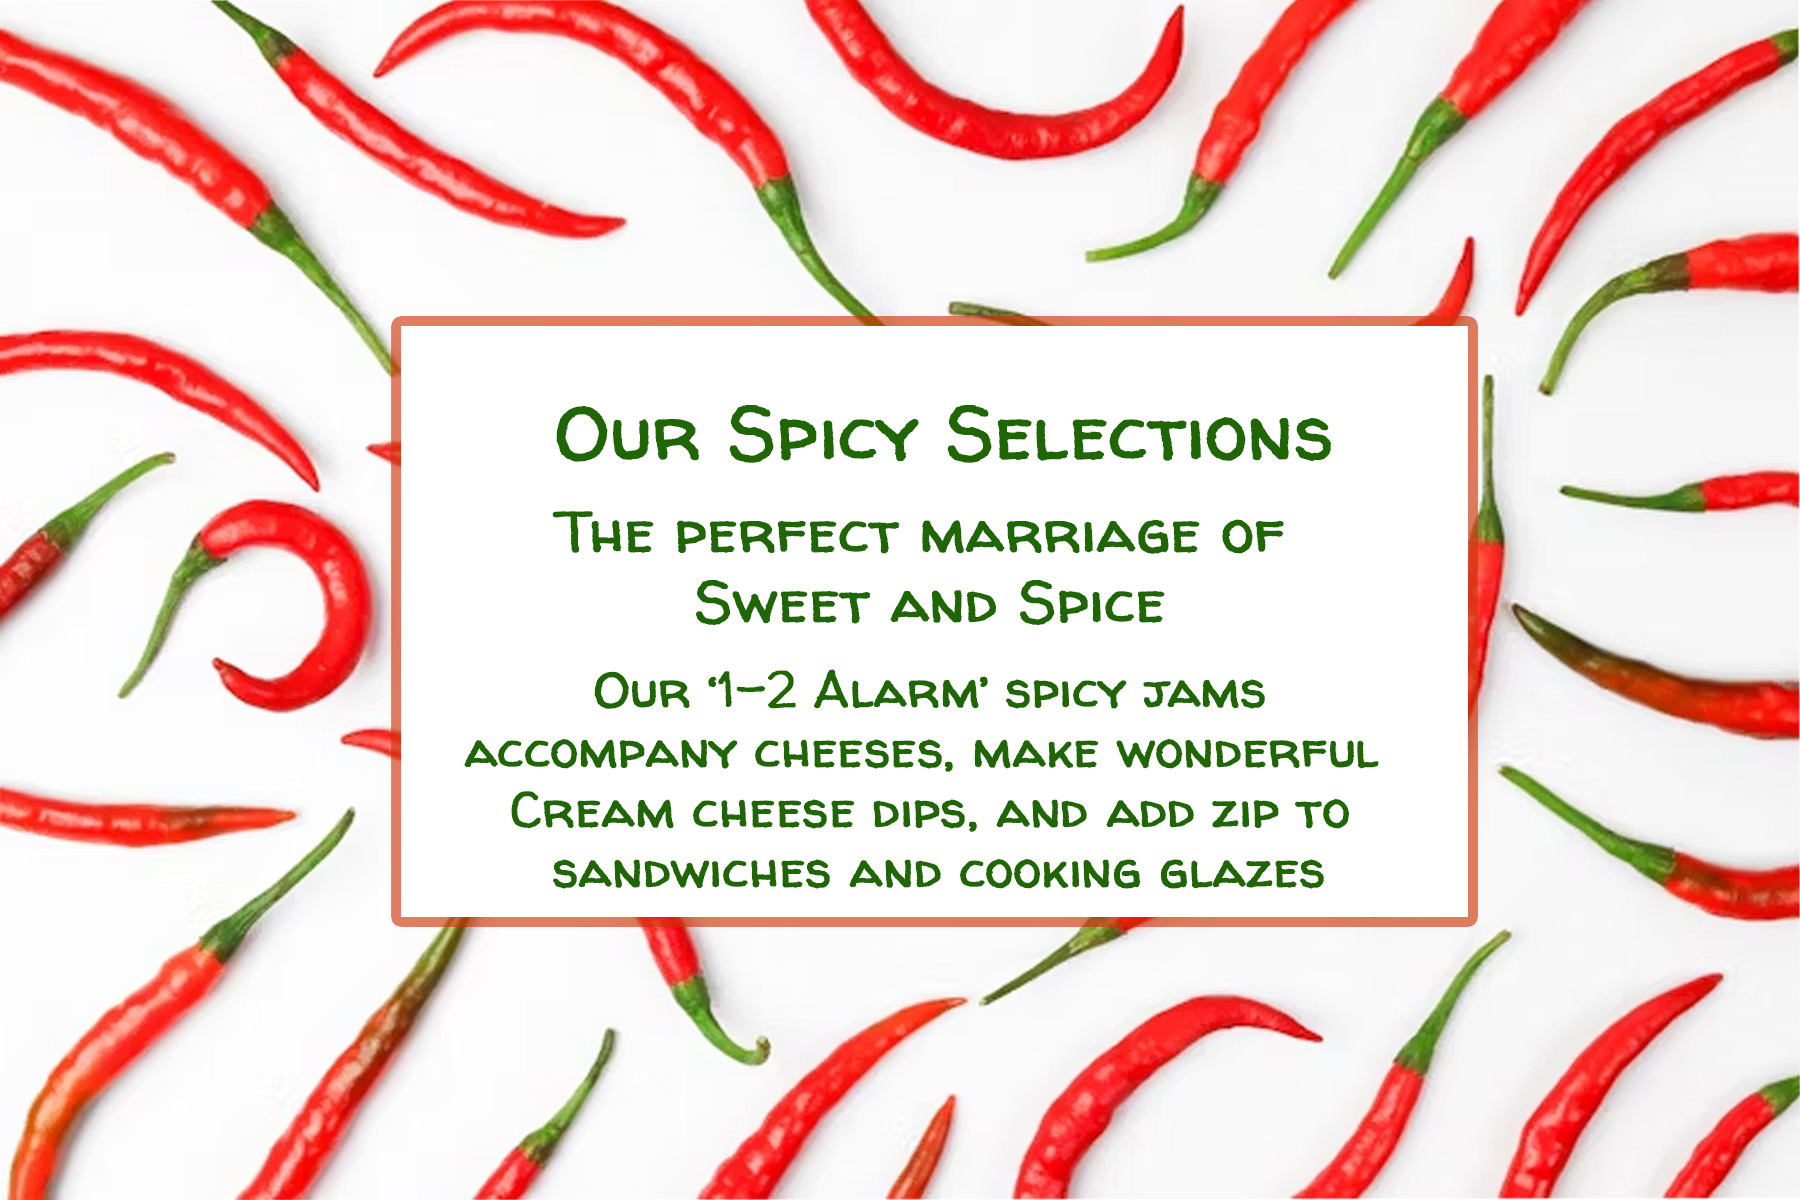 spicy-selections-web-page.jpg